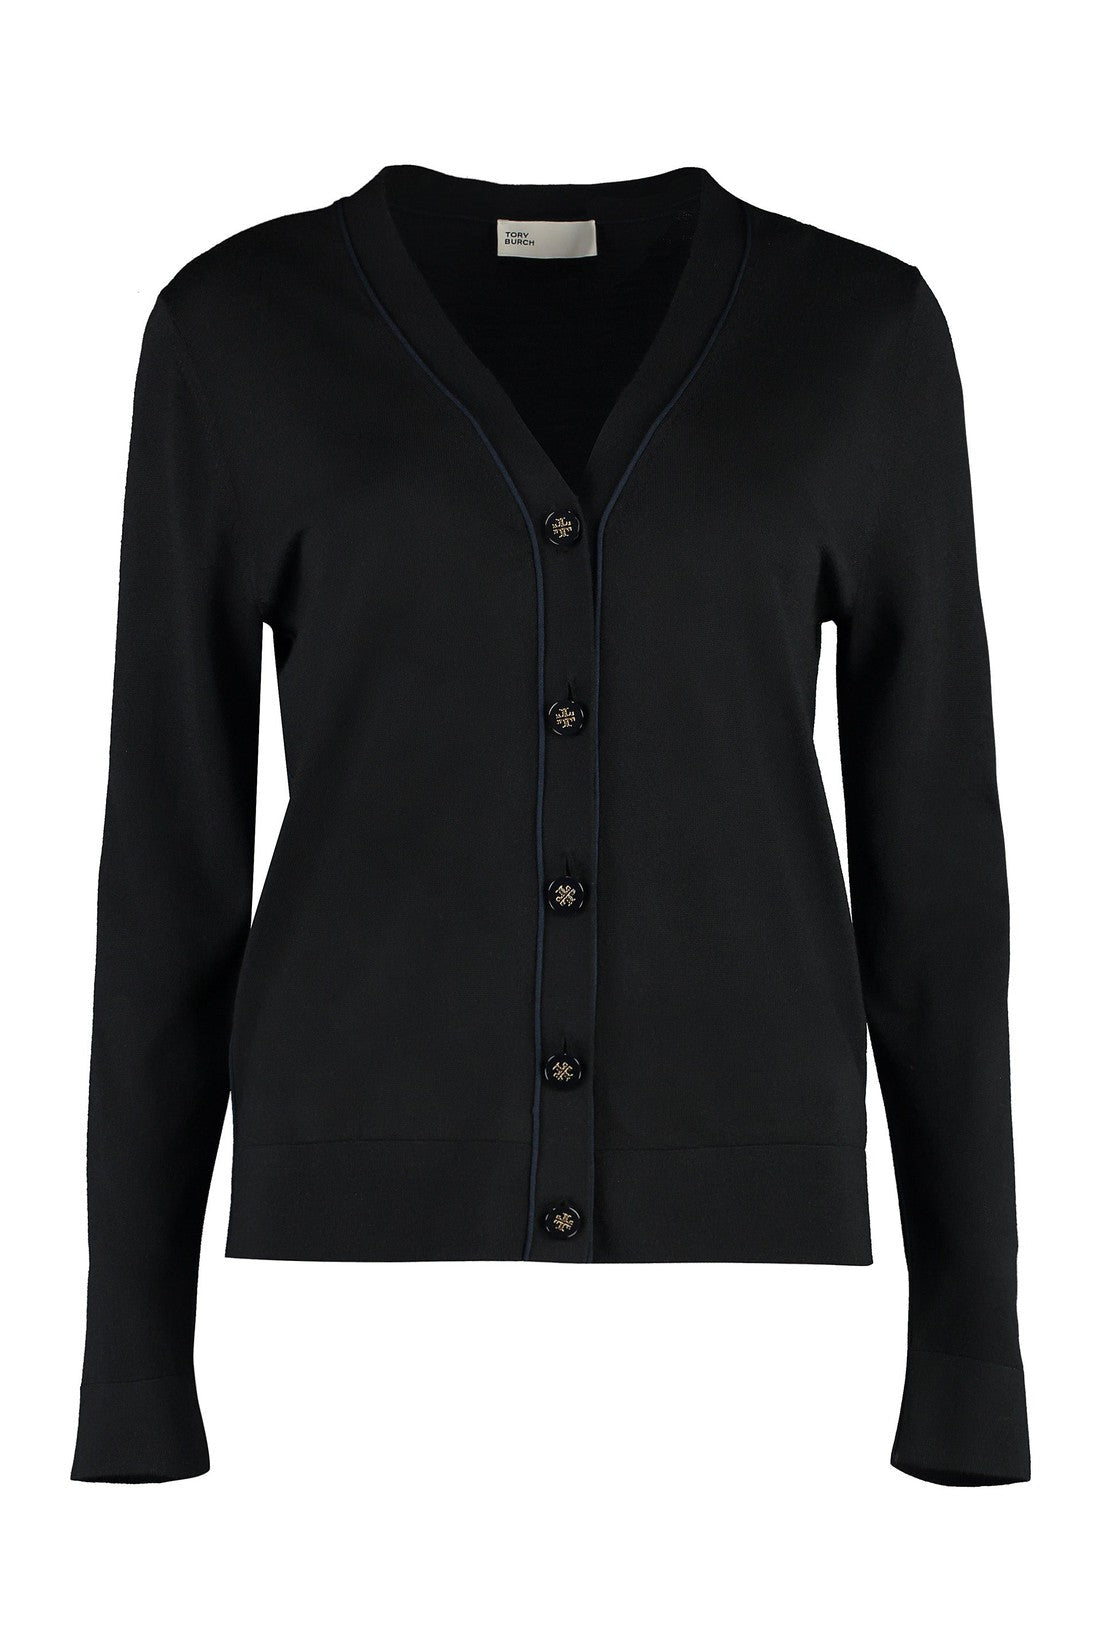 Tory Burch-OUTLET-SALE-Wool-blend cardigan-ARCHIVIST